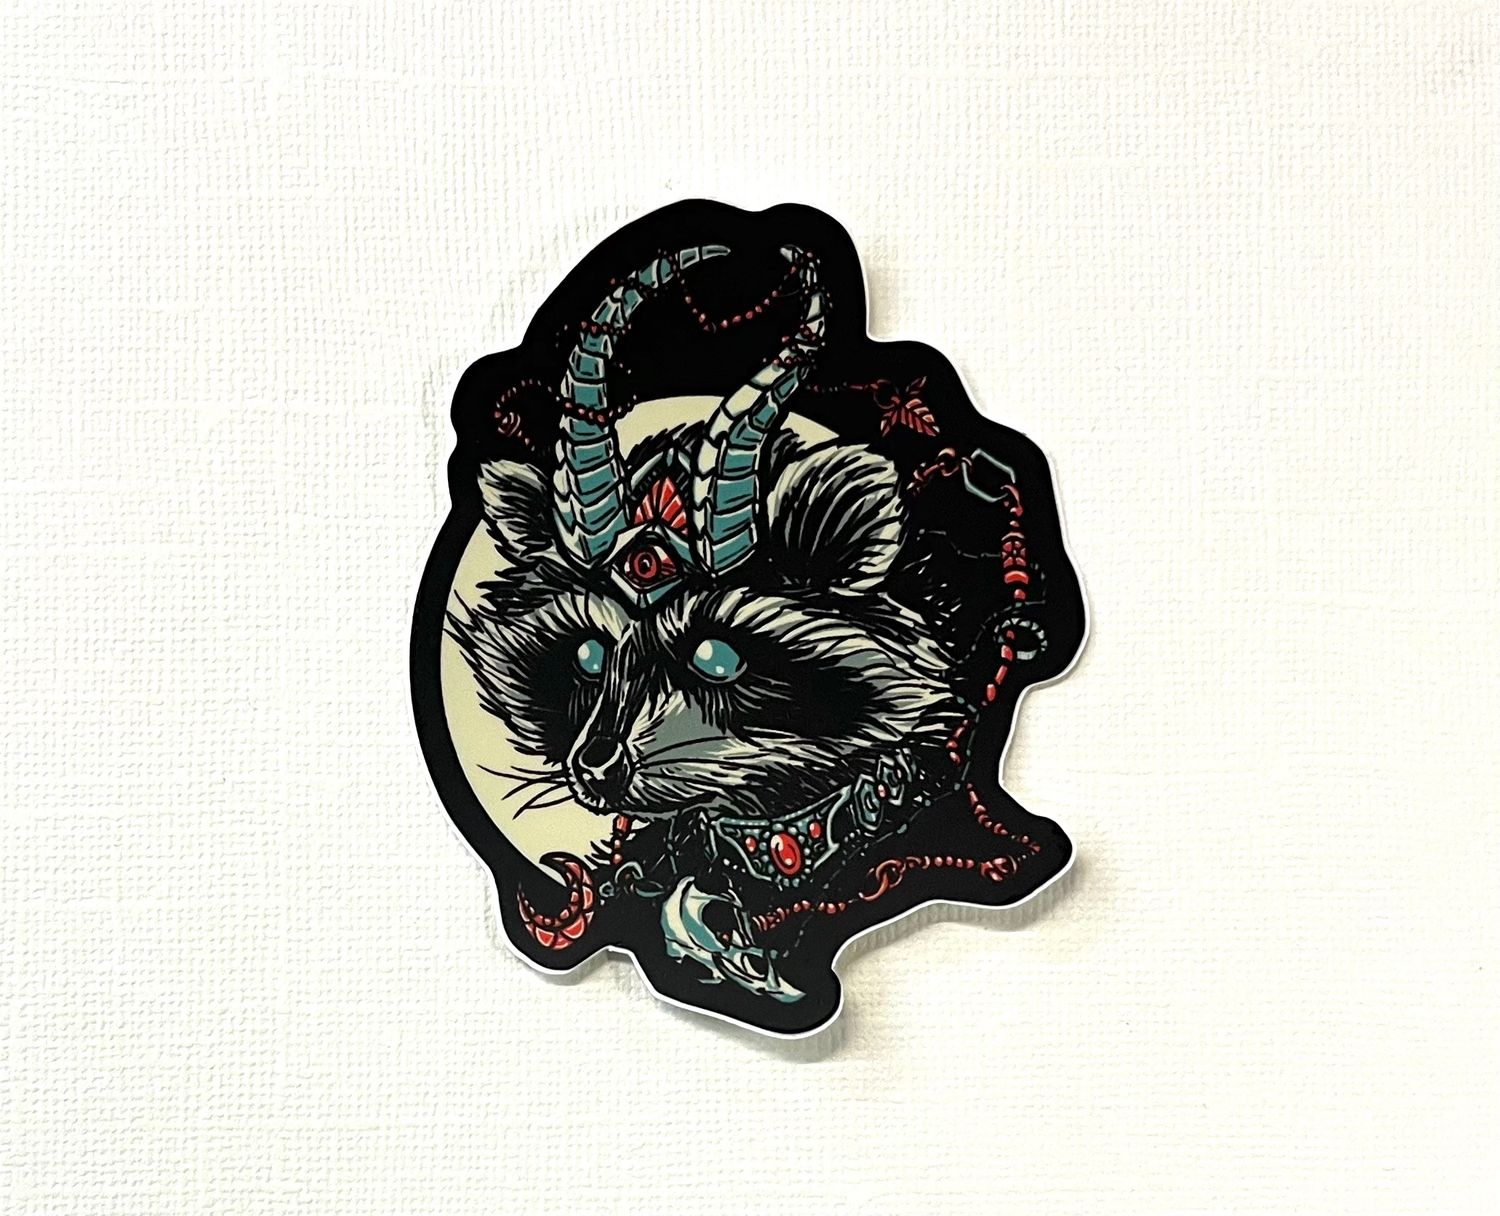 Occult Raccoon - Sticker by Kyle Sauter